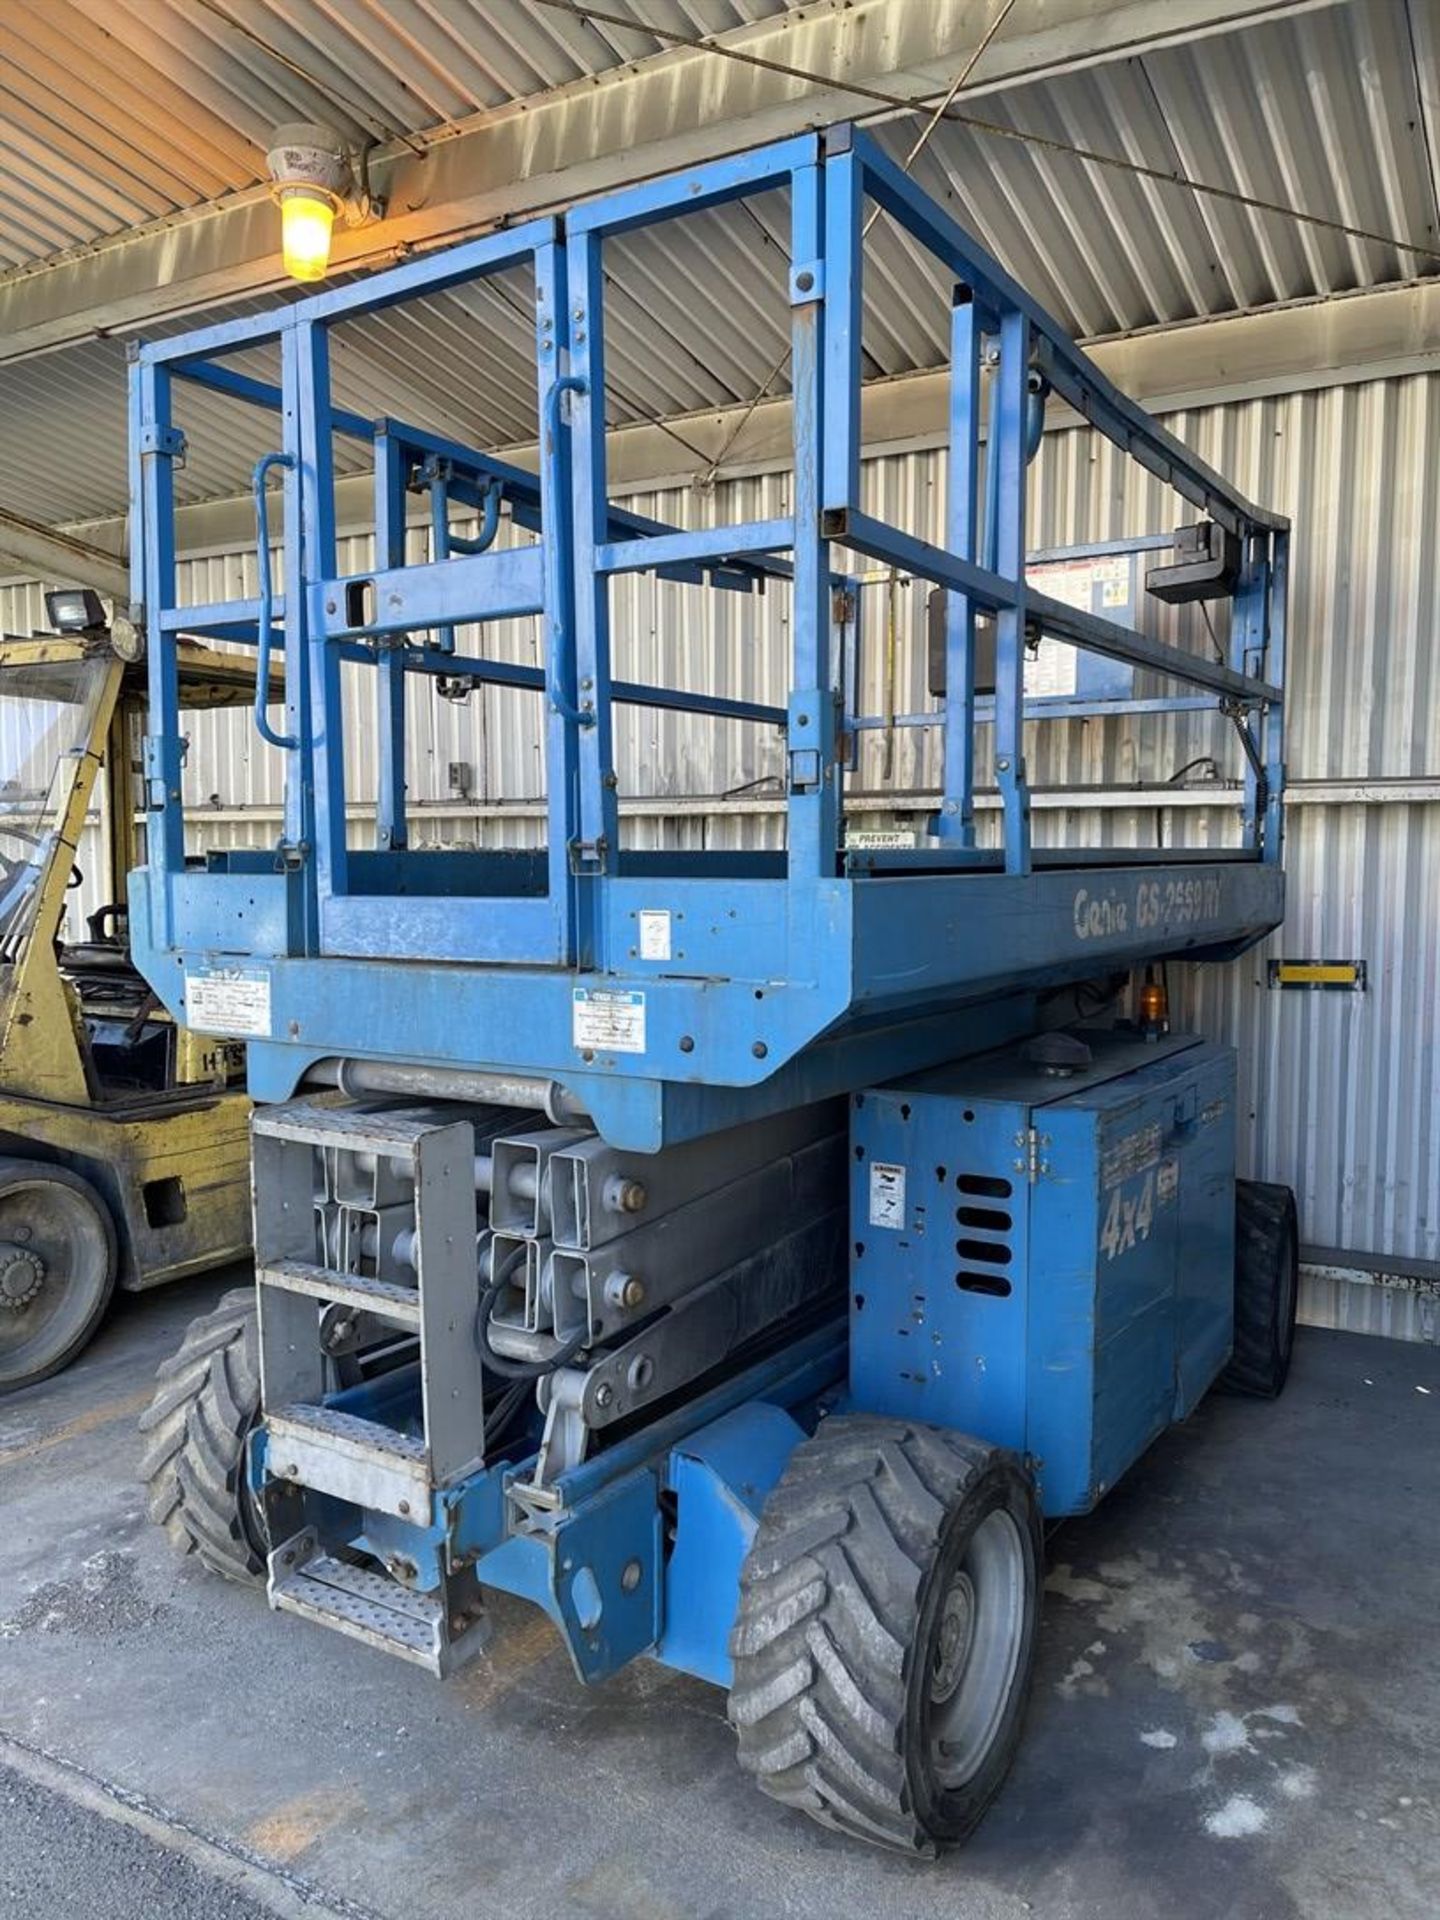 2012 GENIE GS-2669RT Rough Terrain Scissor Lift, s/n GS6912-365, 1500 Lb. Rated Work Load, - Image 2 of 7